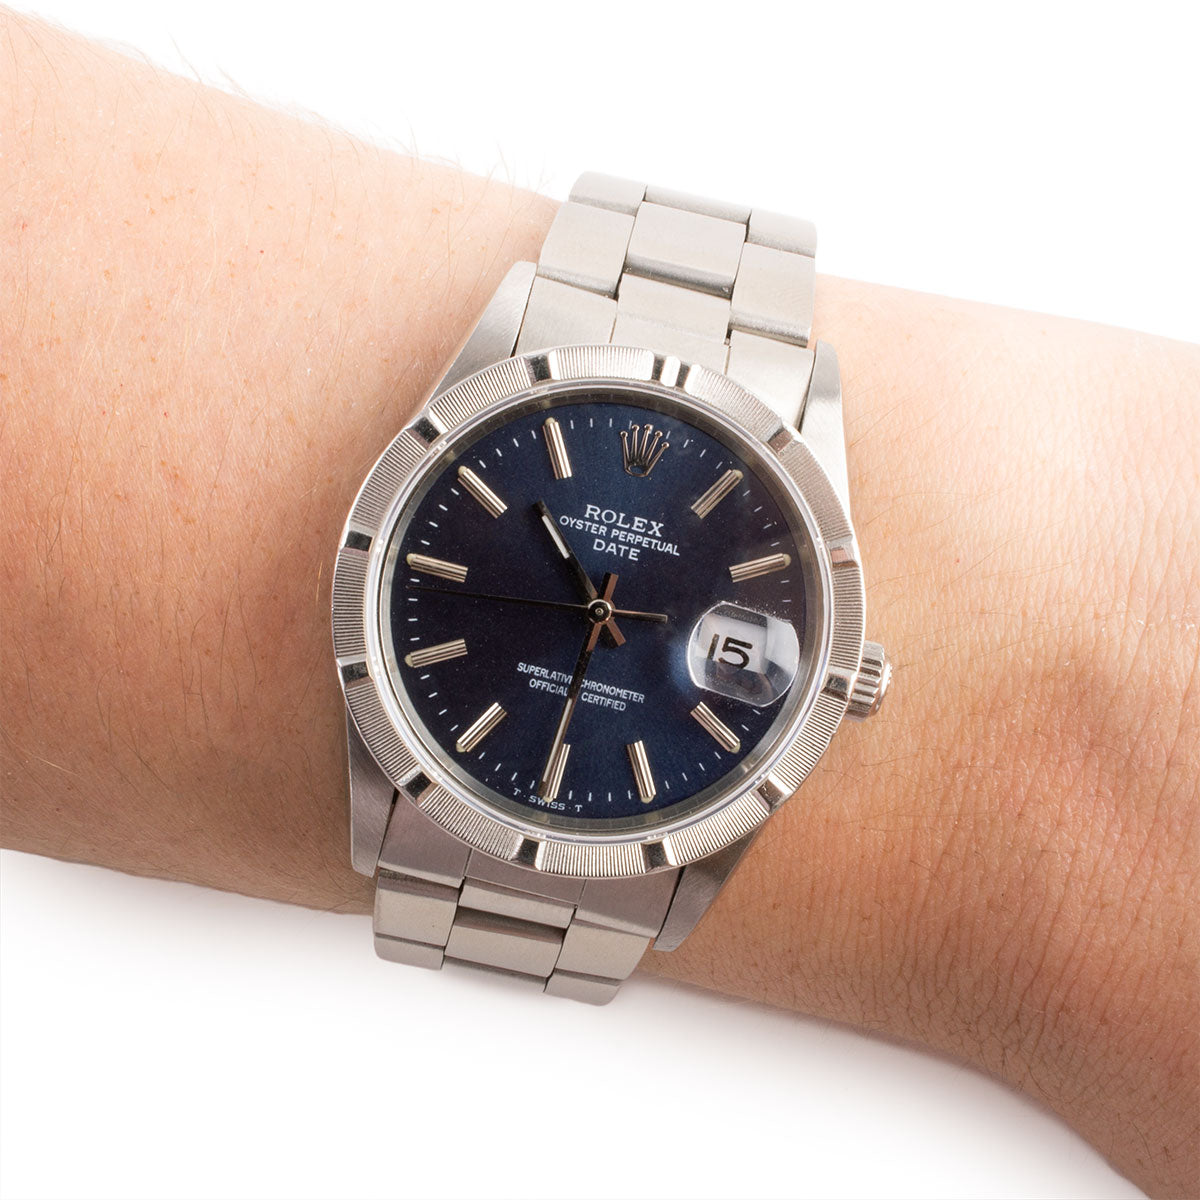 Montre d'occasion - Rolex - Oyster Perpetual Date - 5400€